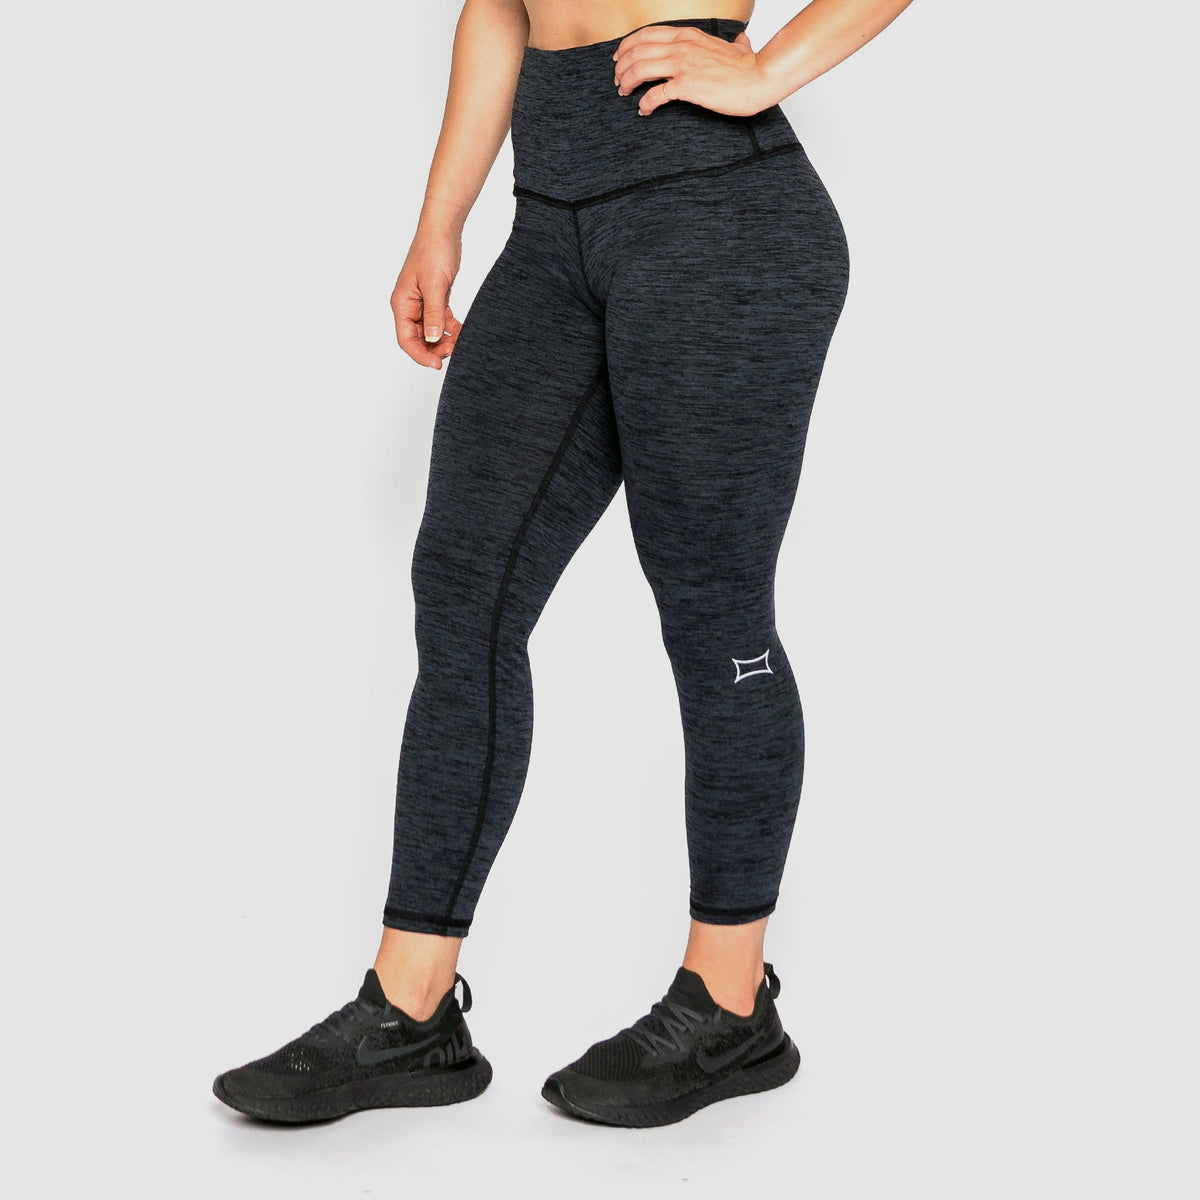 Leggings Sale: Save Up To 40% Off Top-Rated Leggings